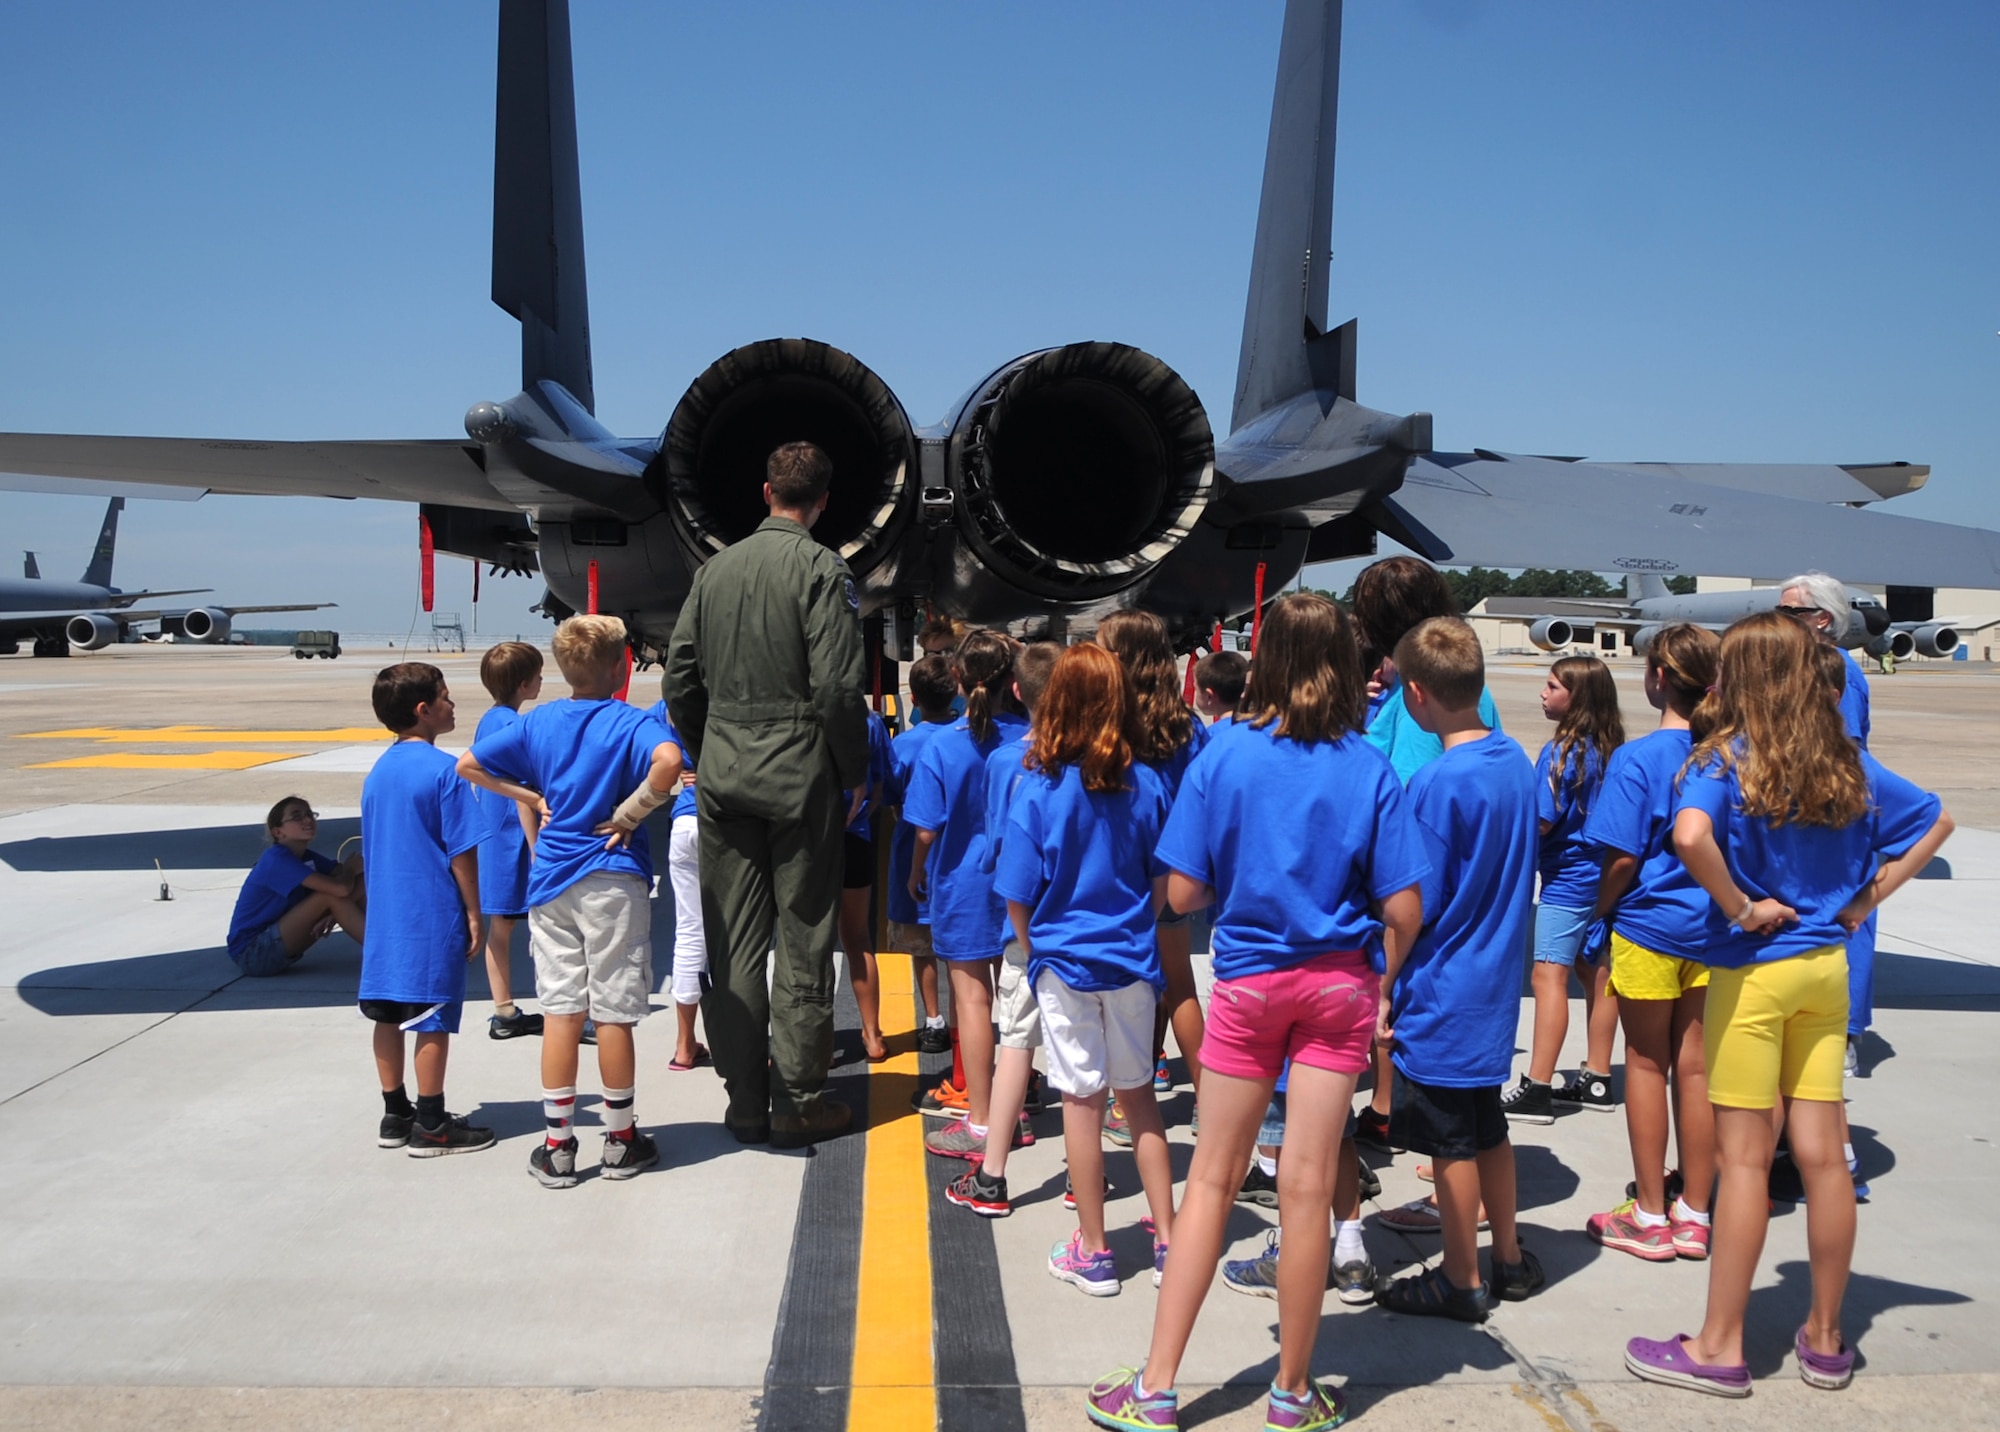 Capt. Tom Morrill, Science and Technology Academies Reinforcing Basic Aviation and Space Exploration commander, explains features of the F-15E Strike Eagle to STARBASE students, June 22, 2015, at Seymour Johnson Air Force Base, North Carolina. STARBASE is an annual, week-long program for children entering the fifth grade to enhance their knowledge of aviation science and other related subjects. (U.S. Air Force photo/Senior Airman Ashley J. Thum)